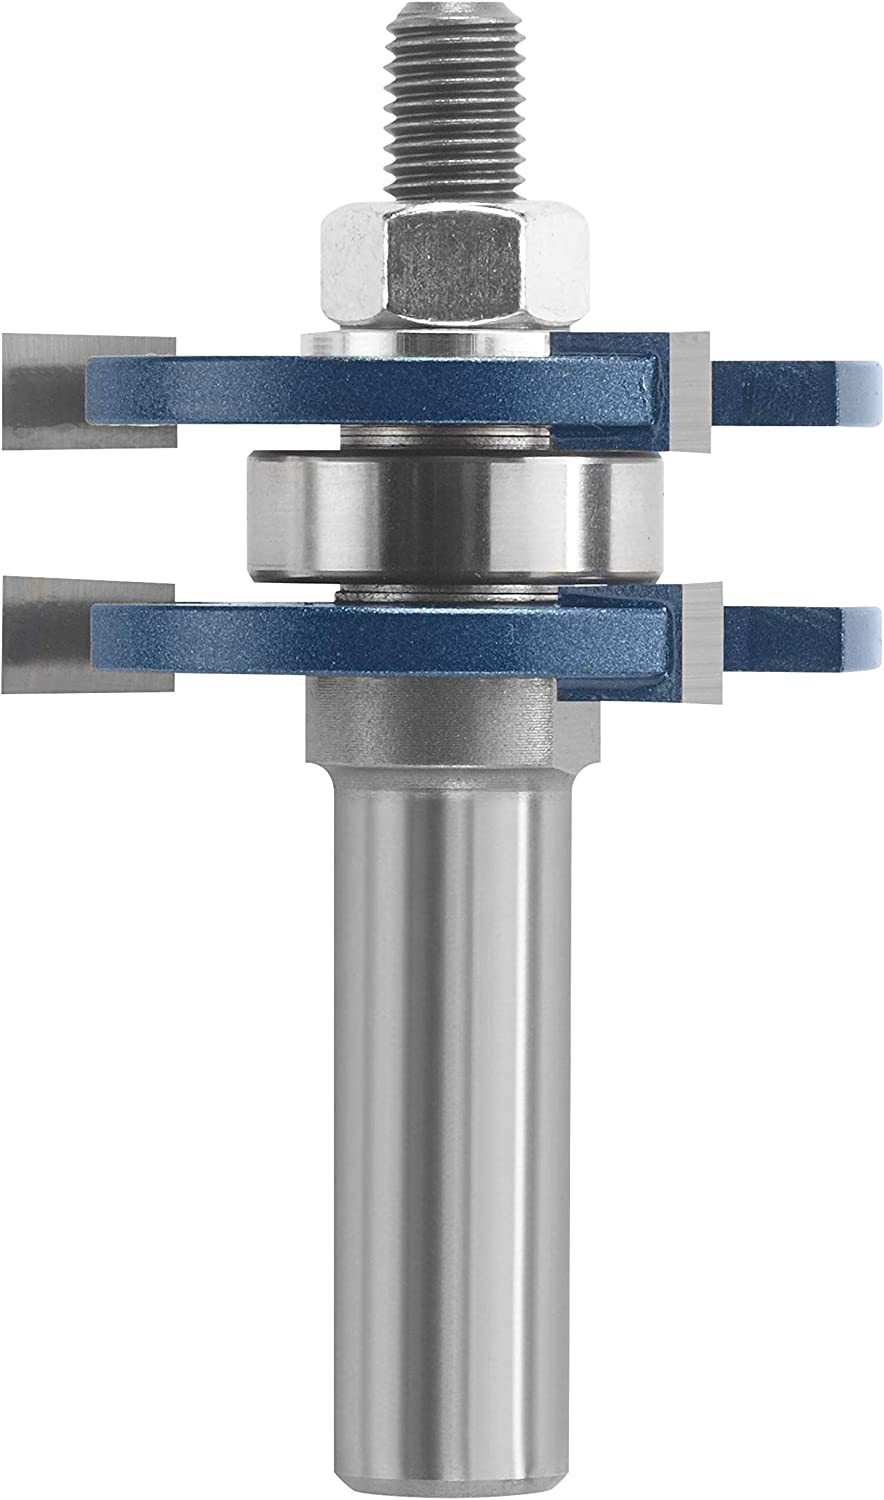 1-7/8 In. X 1/4 In. Carbide-Tipped Tongue And Groove Router Bit, Bosch 84624Mc. - $57.92